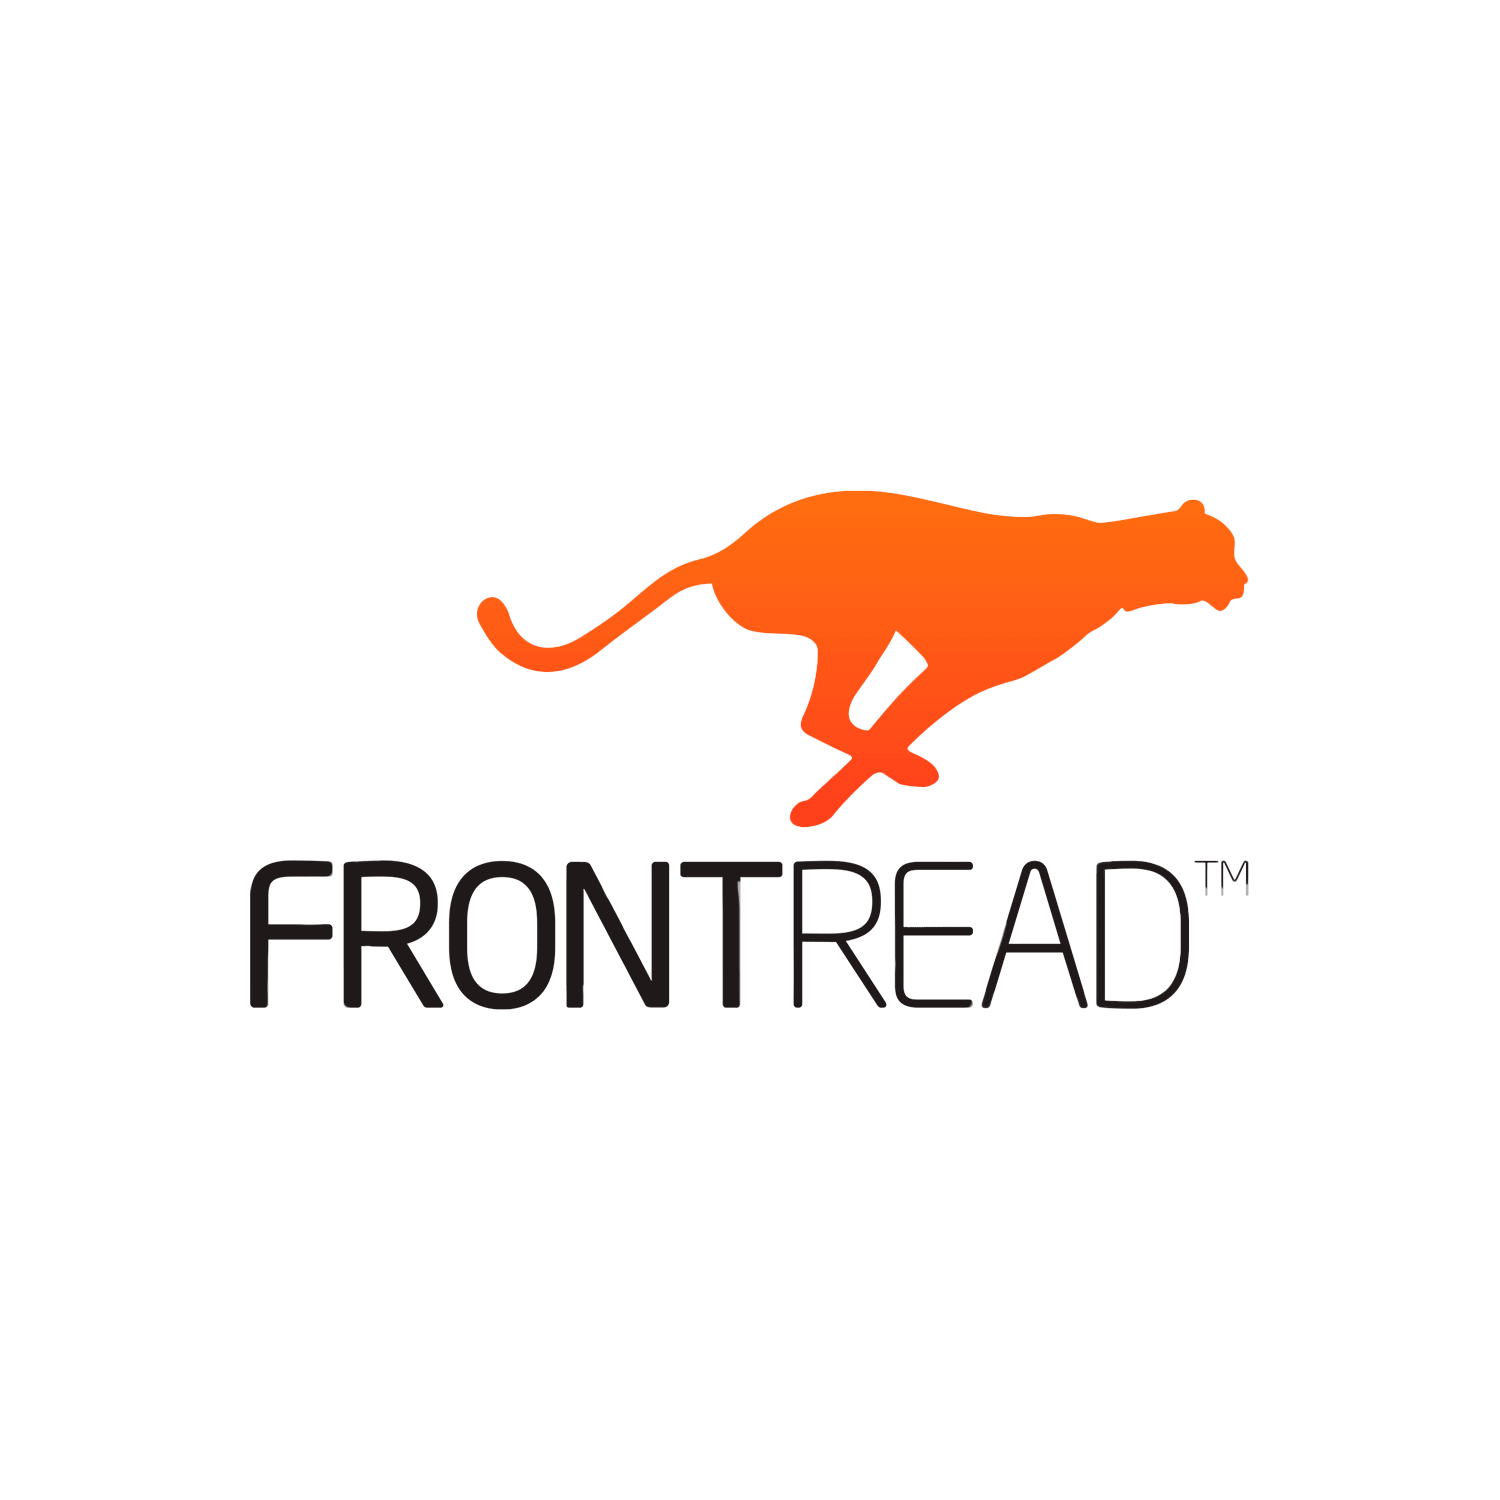 Frontread-2-1-1.png